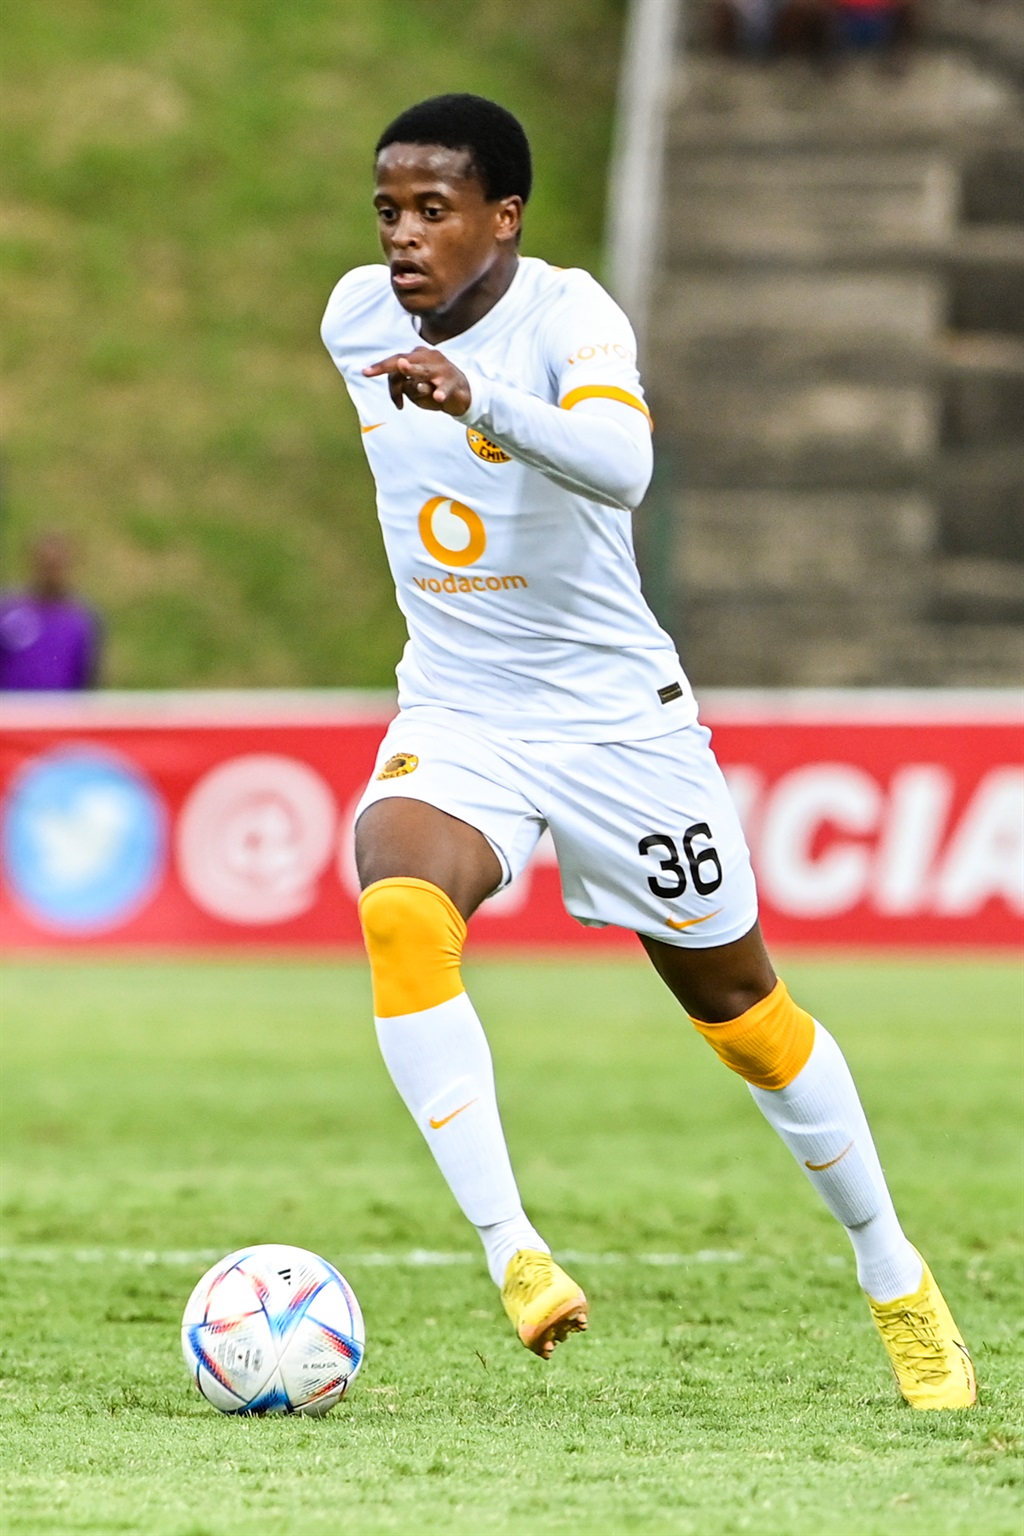 DURBAN, SOUTH AFRICA - MARCH 04: Wandile Duba of Kaizer Chiefs during the DStv Premiership match between Richards Bay and Kaizer Chiefs at King Zwelithini Stadium on March 04, 2023 in Durban, South Africa. (Photo by Darren Stewart/Gallo Images)